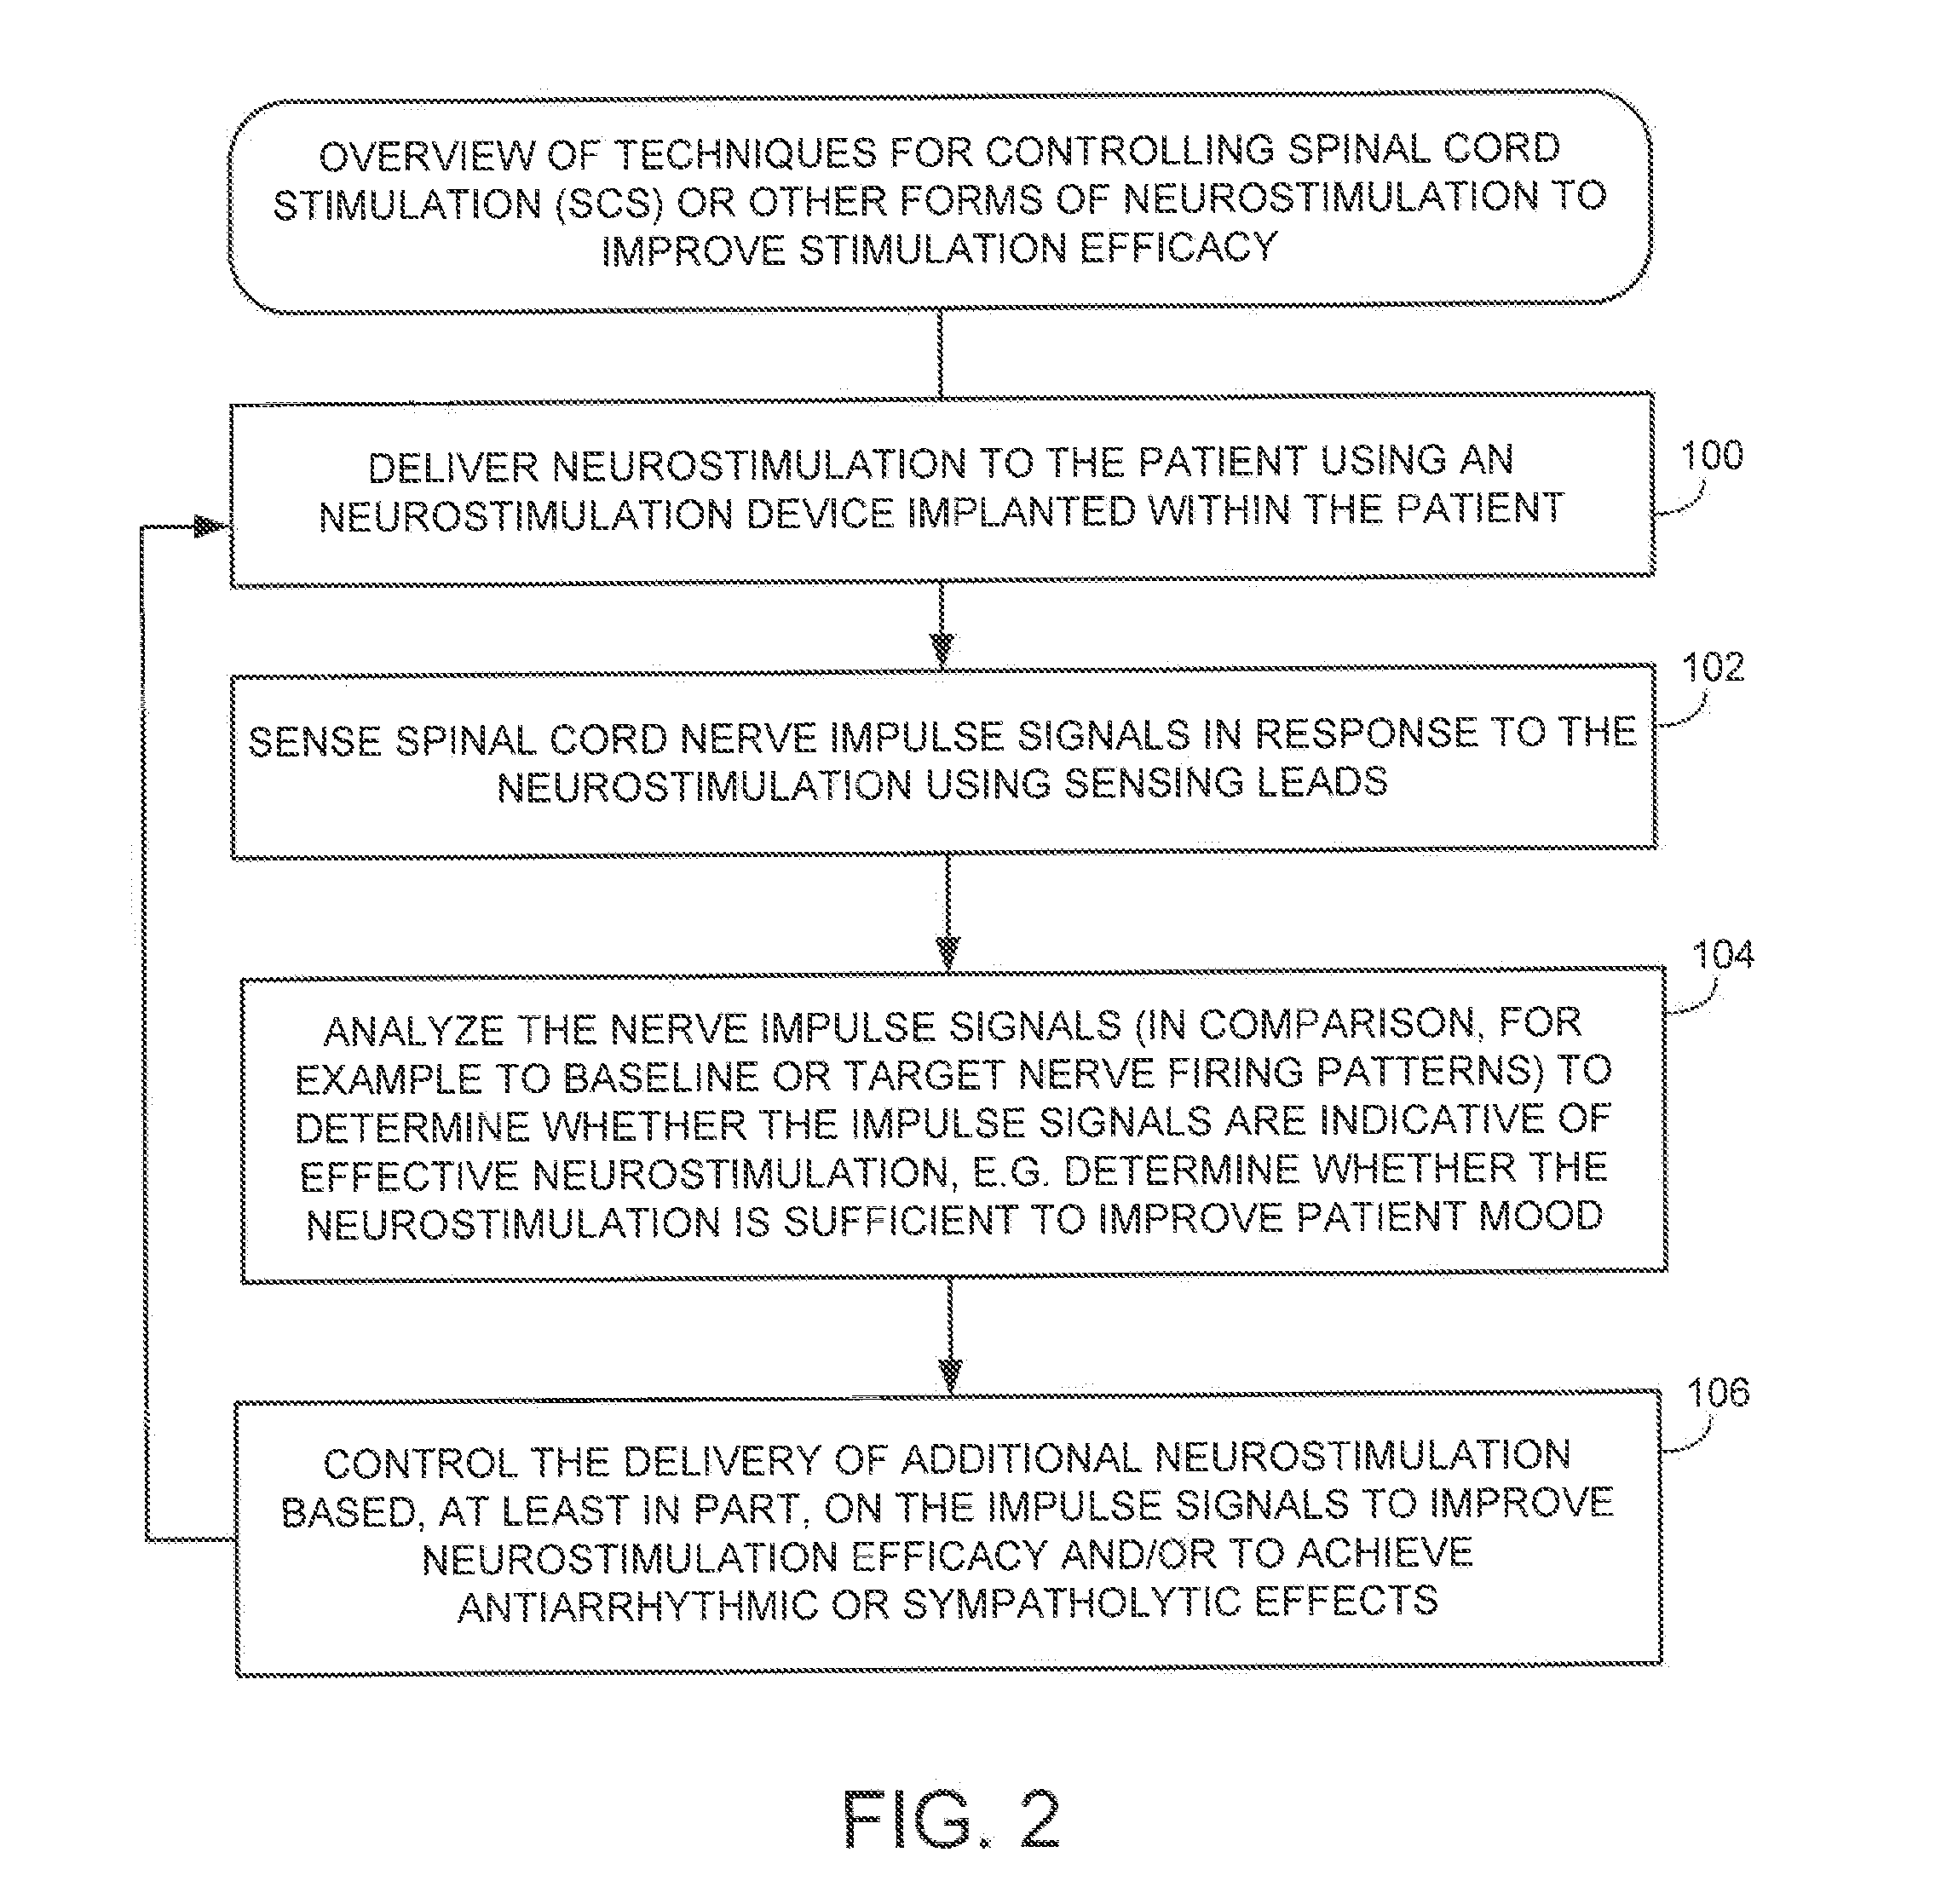 Systems and methods for controlling spinal cord stimulation to improve stimulation efficacy for use by implantable medical devices